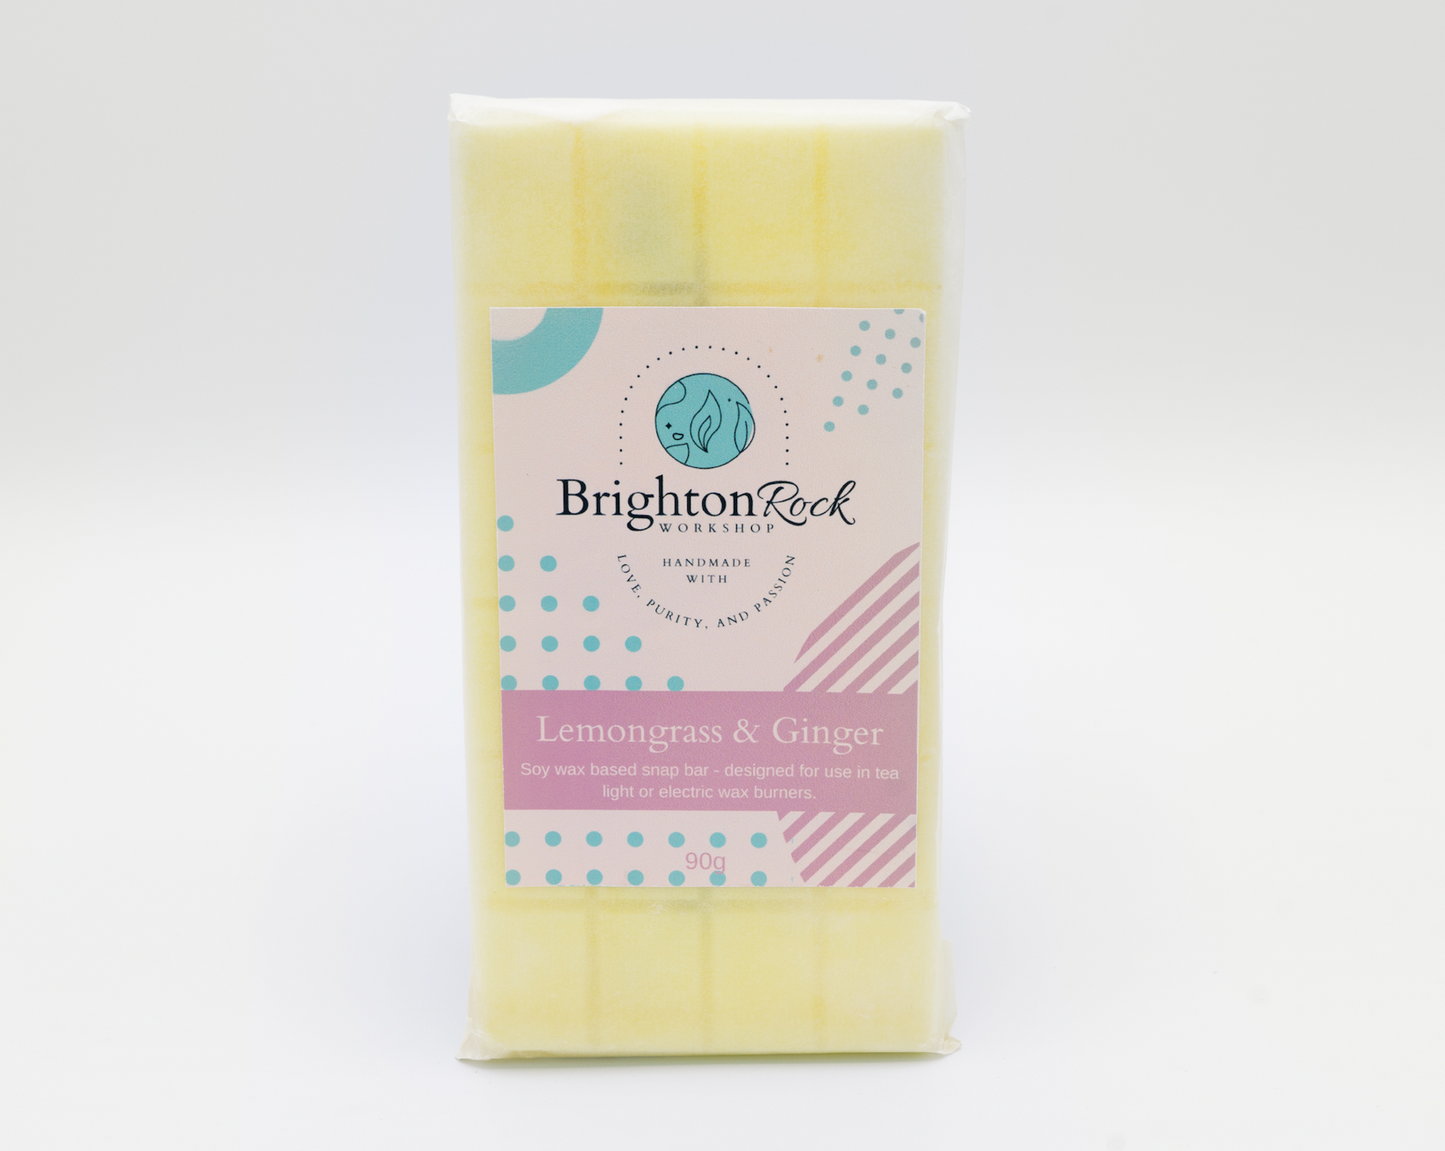 30g or 90g strongly scented wax melt snap bars. Eco friendly waxed paper packaging. Brighton Rock Workshop wax melts made in Spain and the United Kingdom, available in two sizes. Suitable for tea light or electric burners